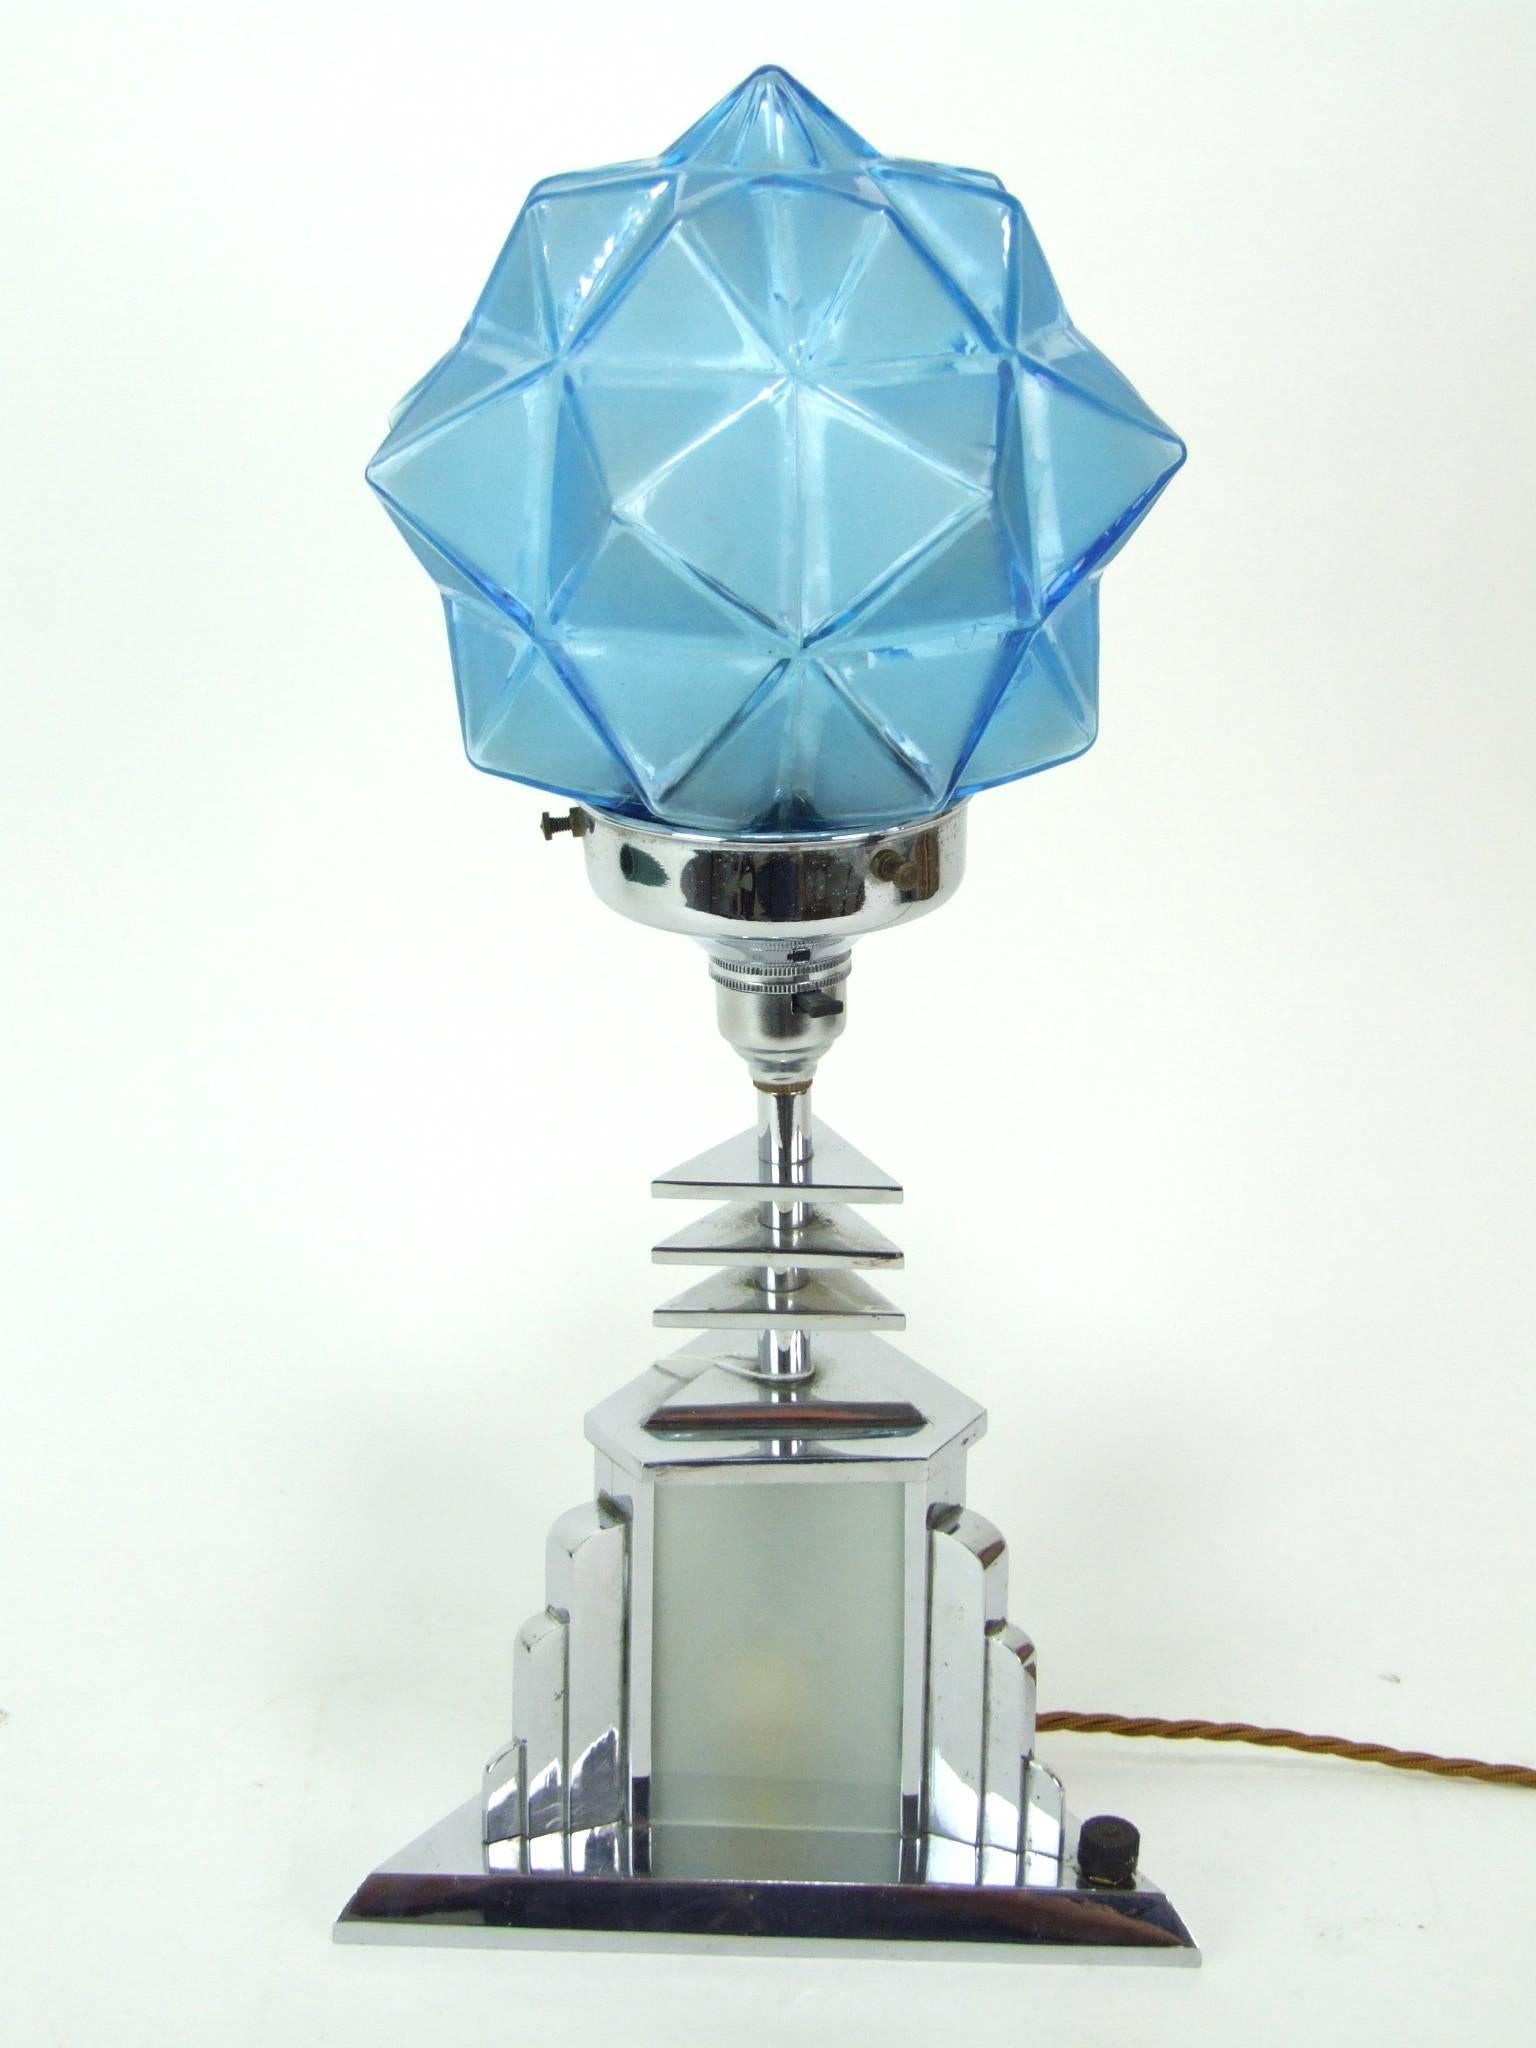 Top quality Adnet style triangle and star Art Deco shade table lamp. Blue glass star shade that lights up and also has a bulb in the base glazed section. It measures 8 inches to each side of the base (20cm) and 17 inches high (43cm). In excellent